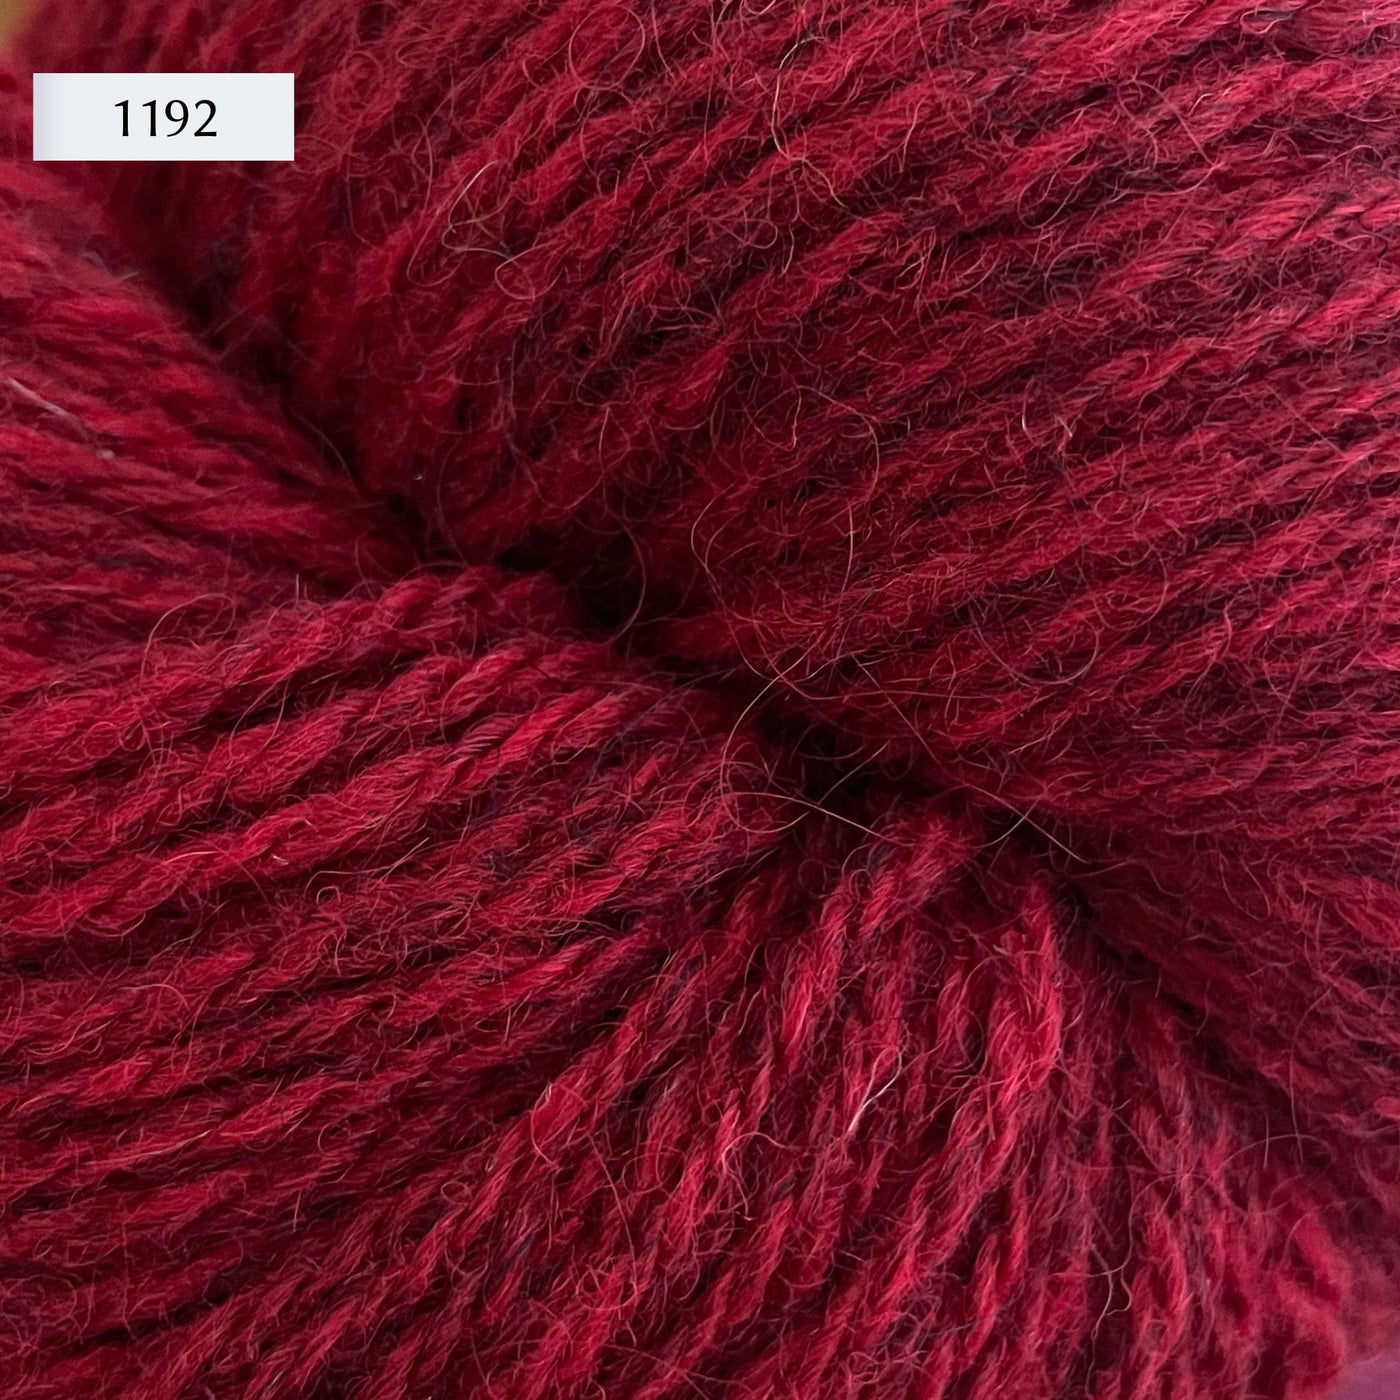 Ullcentrum 3ply, a worsted weight wool yarn, in color 1192, a rich red